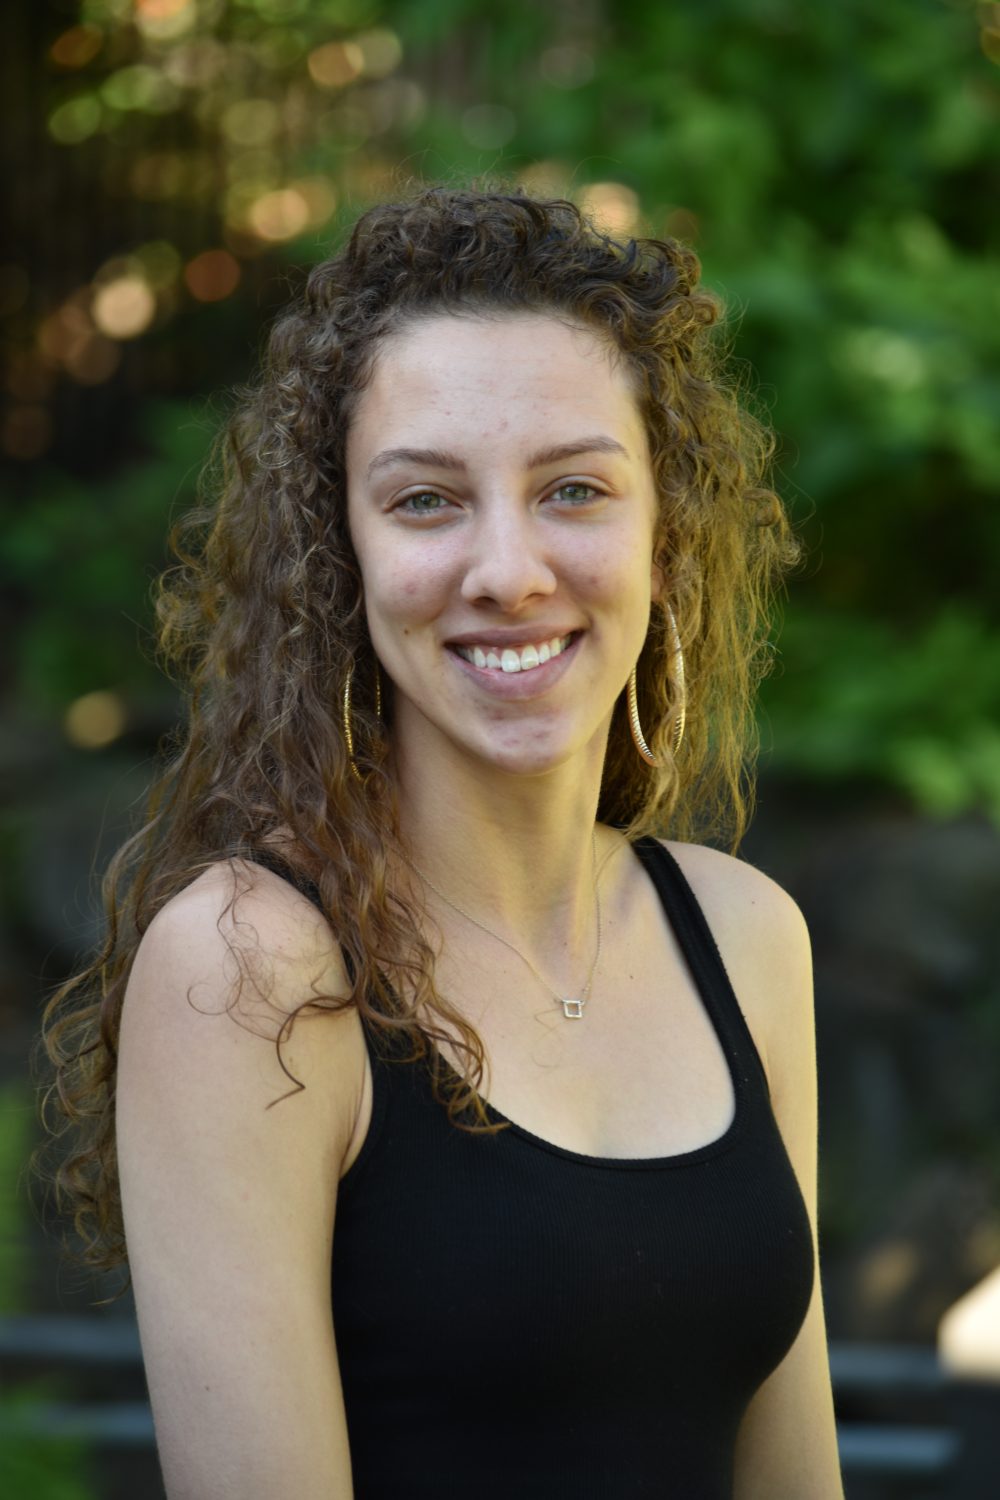 Emory Neer, 2018-19 EAO Peer Mentor, portrait photo of female with curly hair, wearing a black tank top, large golden earrings, and a necklace.